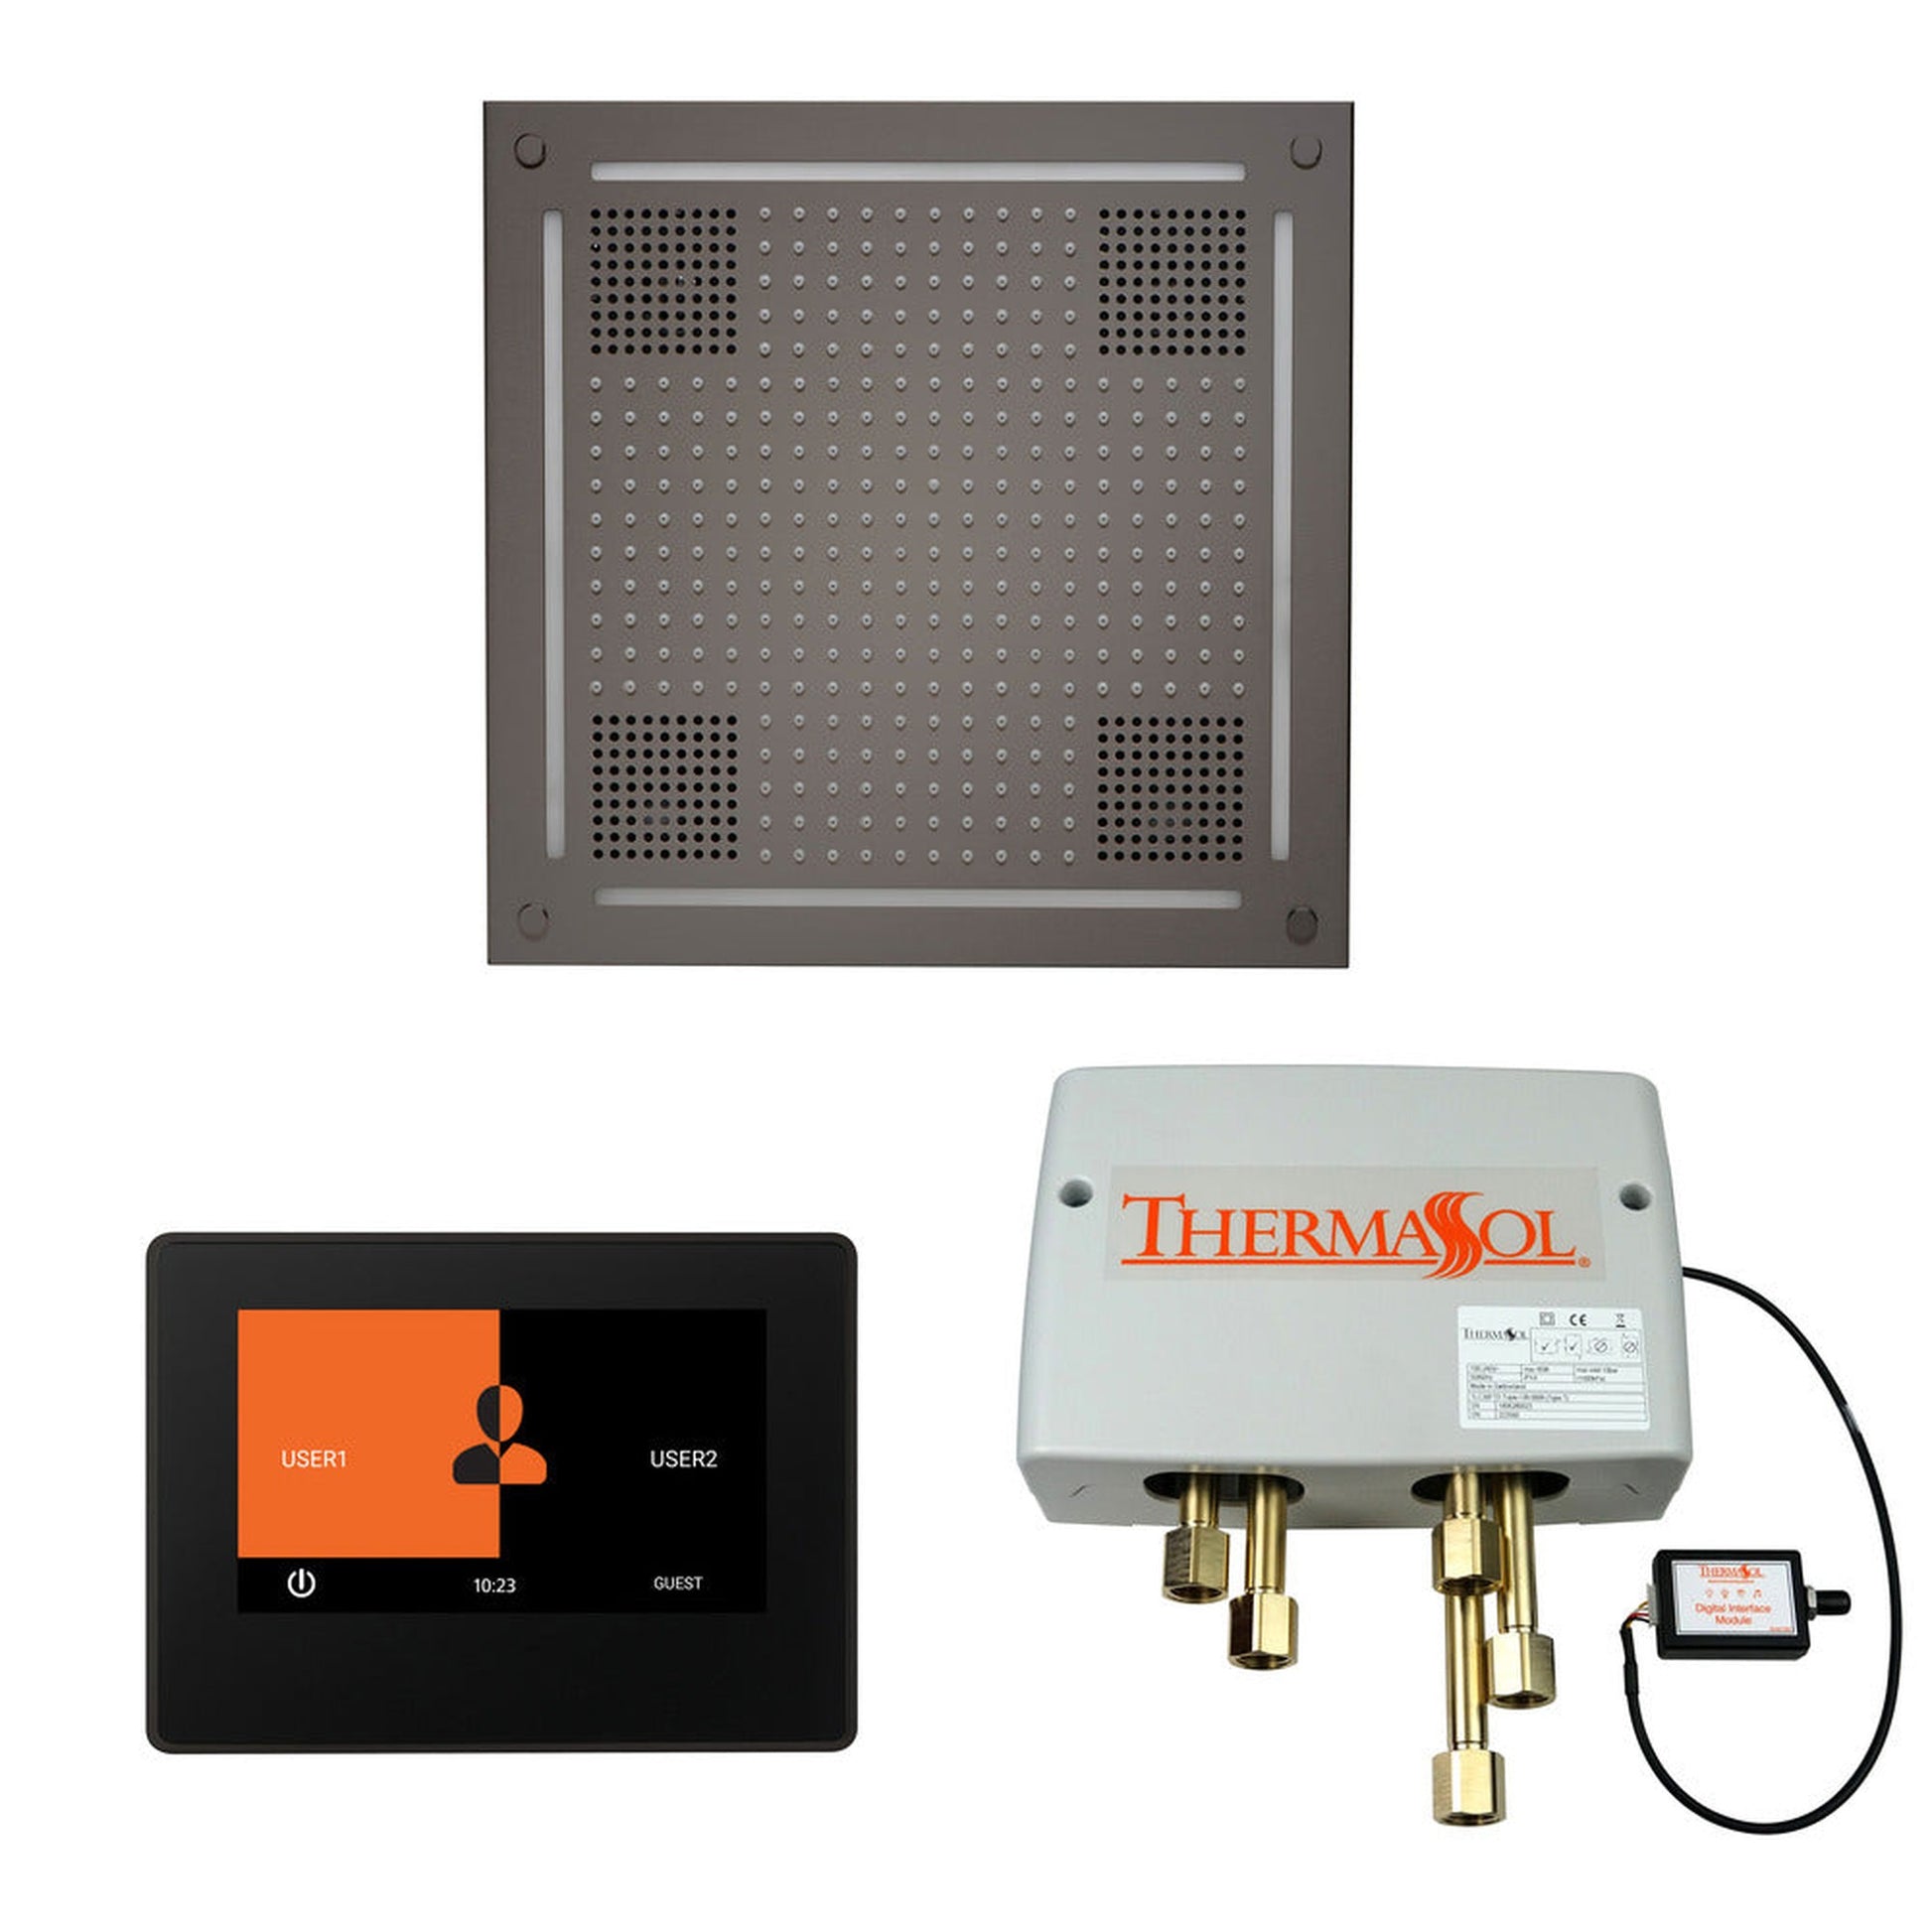 ThermaSol The Wellness Black Nickel Finish Hydrovive Shower Square Package with 7" ThermaTouch